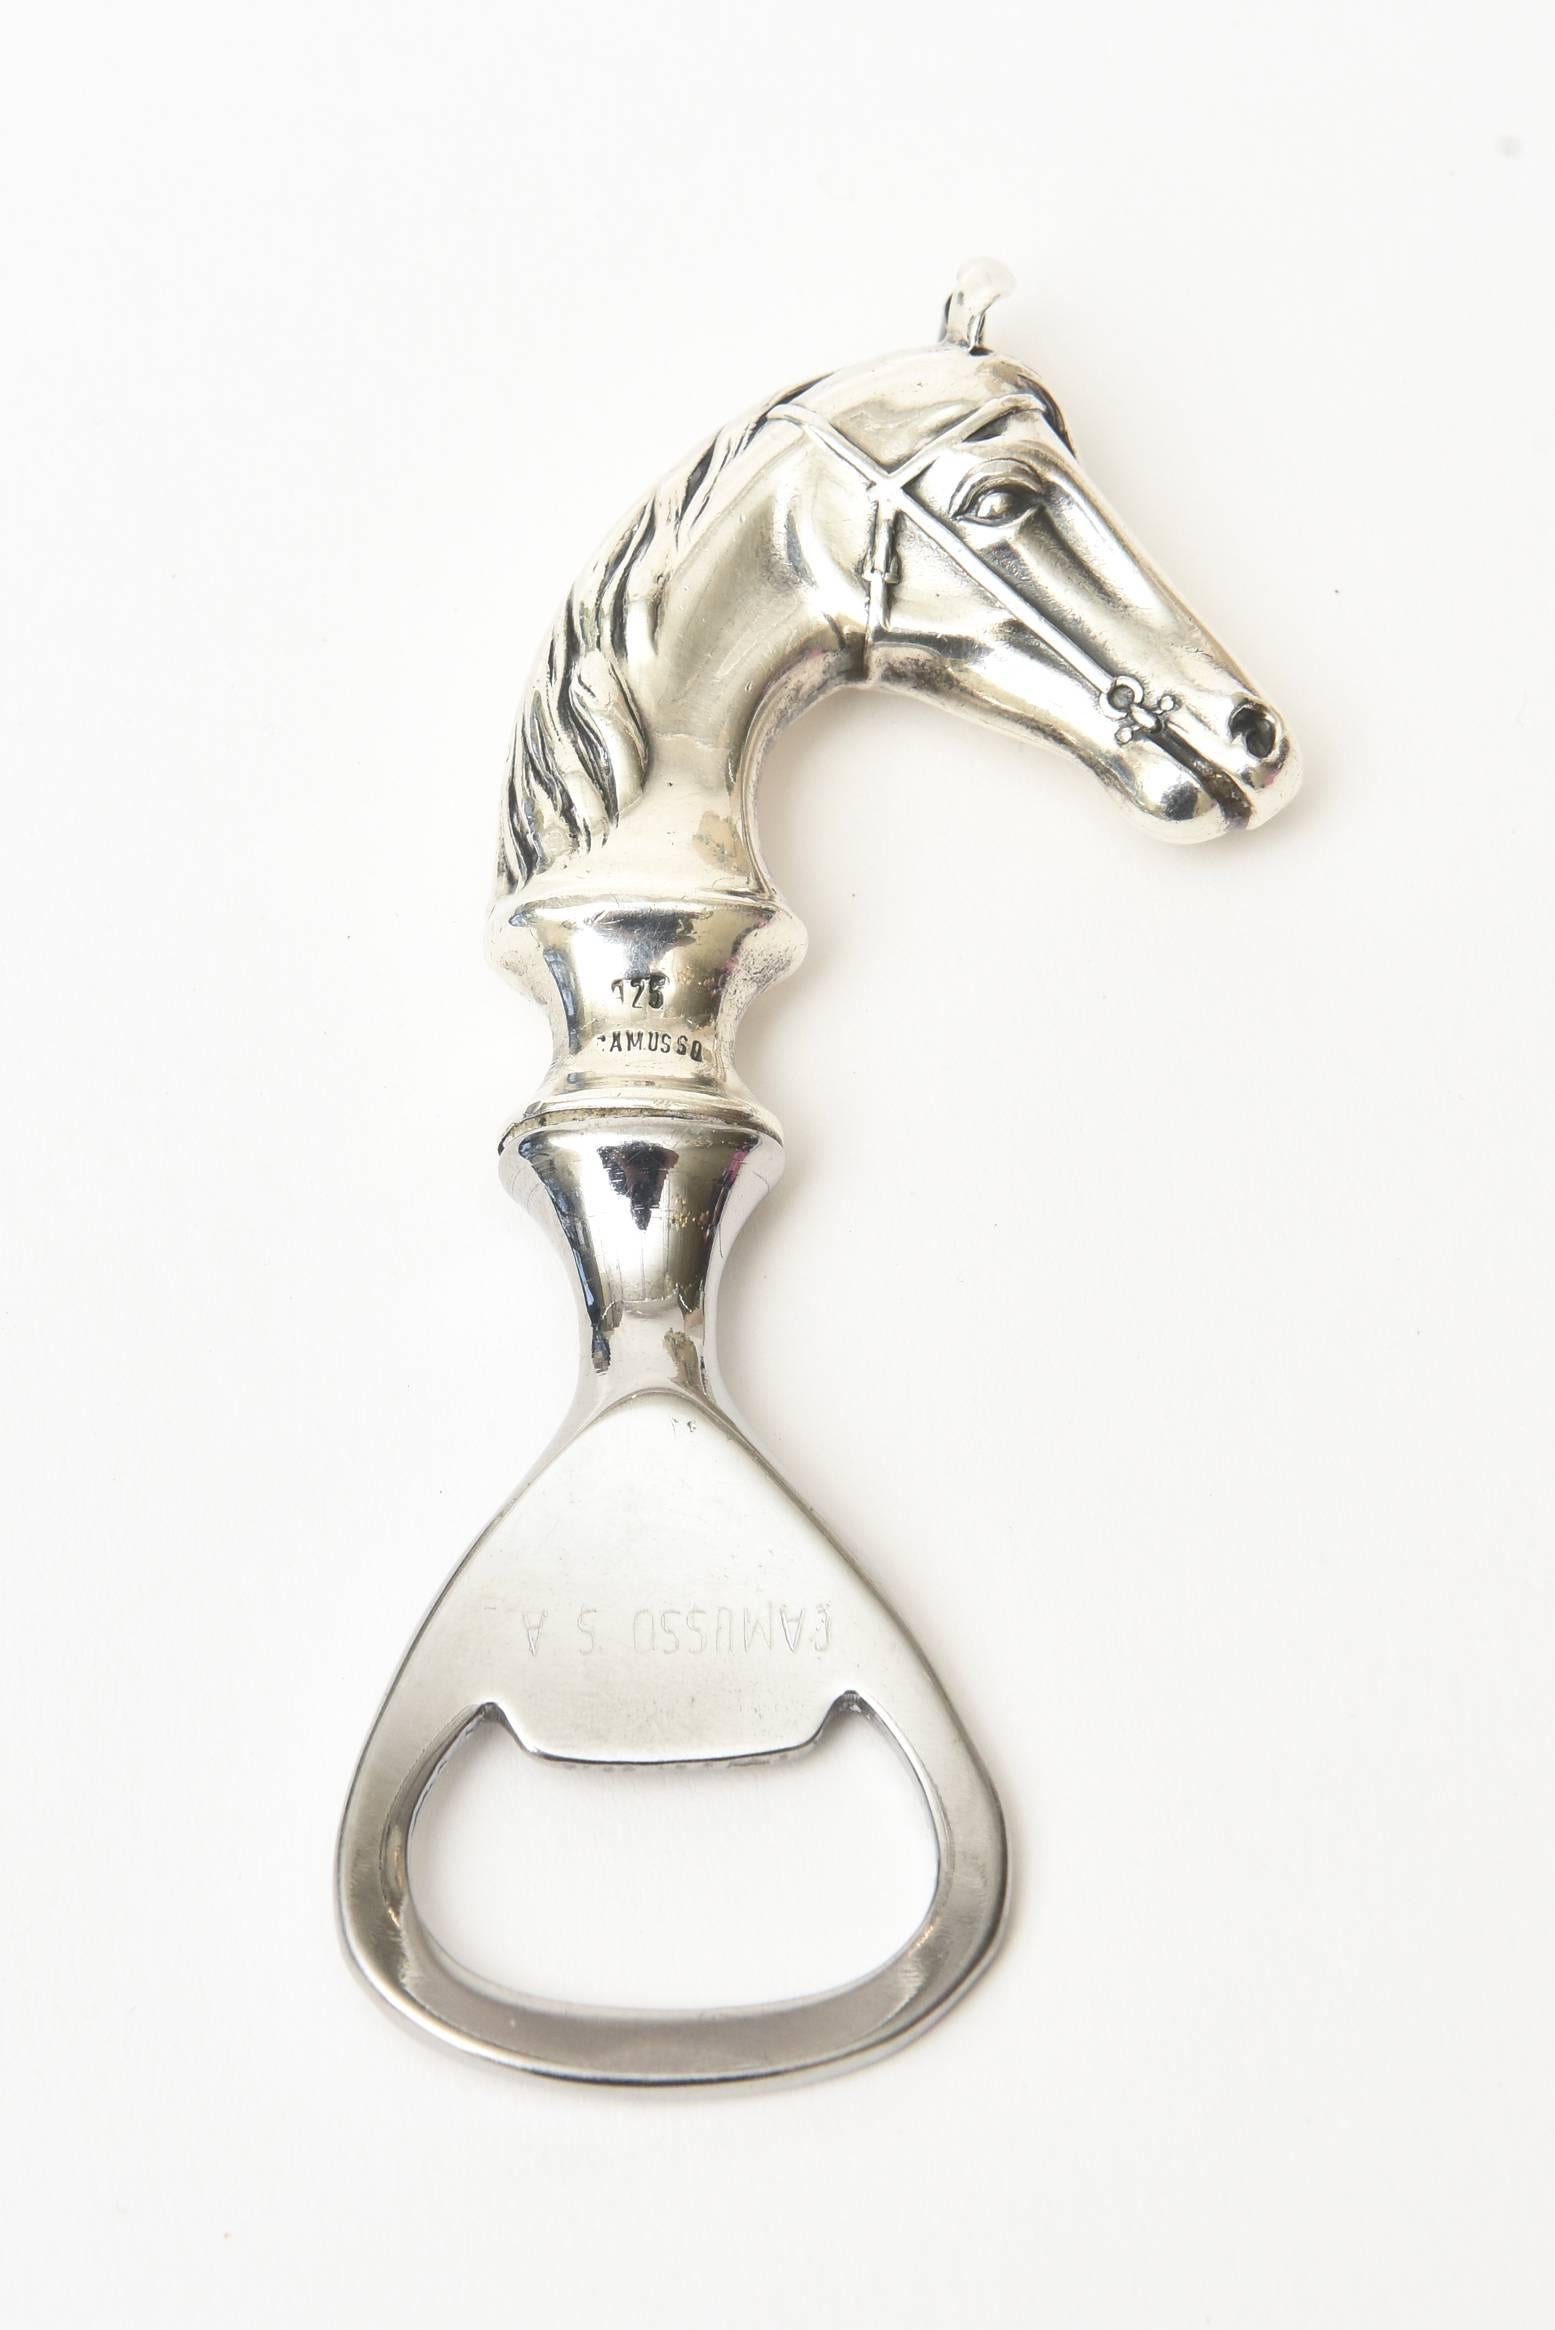 This hallmarked English vintage sterling silver horse bottle opener/ barware is elegant and a great addition to any bar. It has good weight to it and well made.
For all the horse lovers of the world, this makes a great gift to oneself or others.
